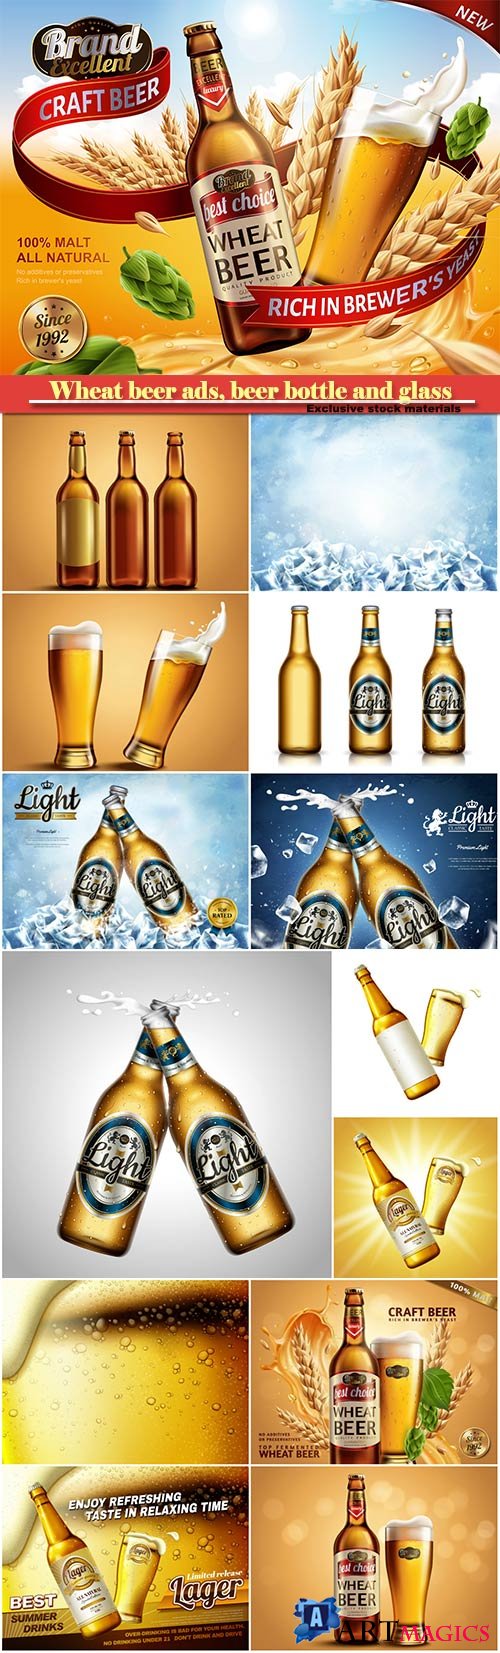 Wheat beer ads, beer bottle and glass with splashing beer and ingredients